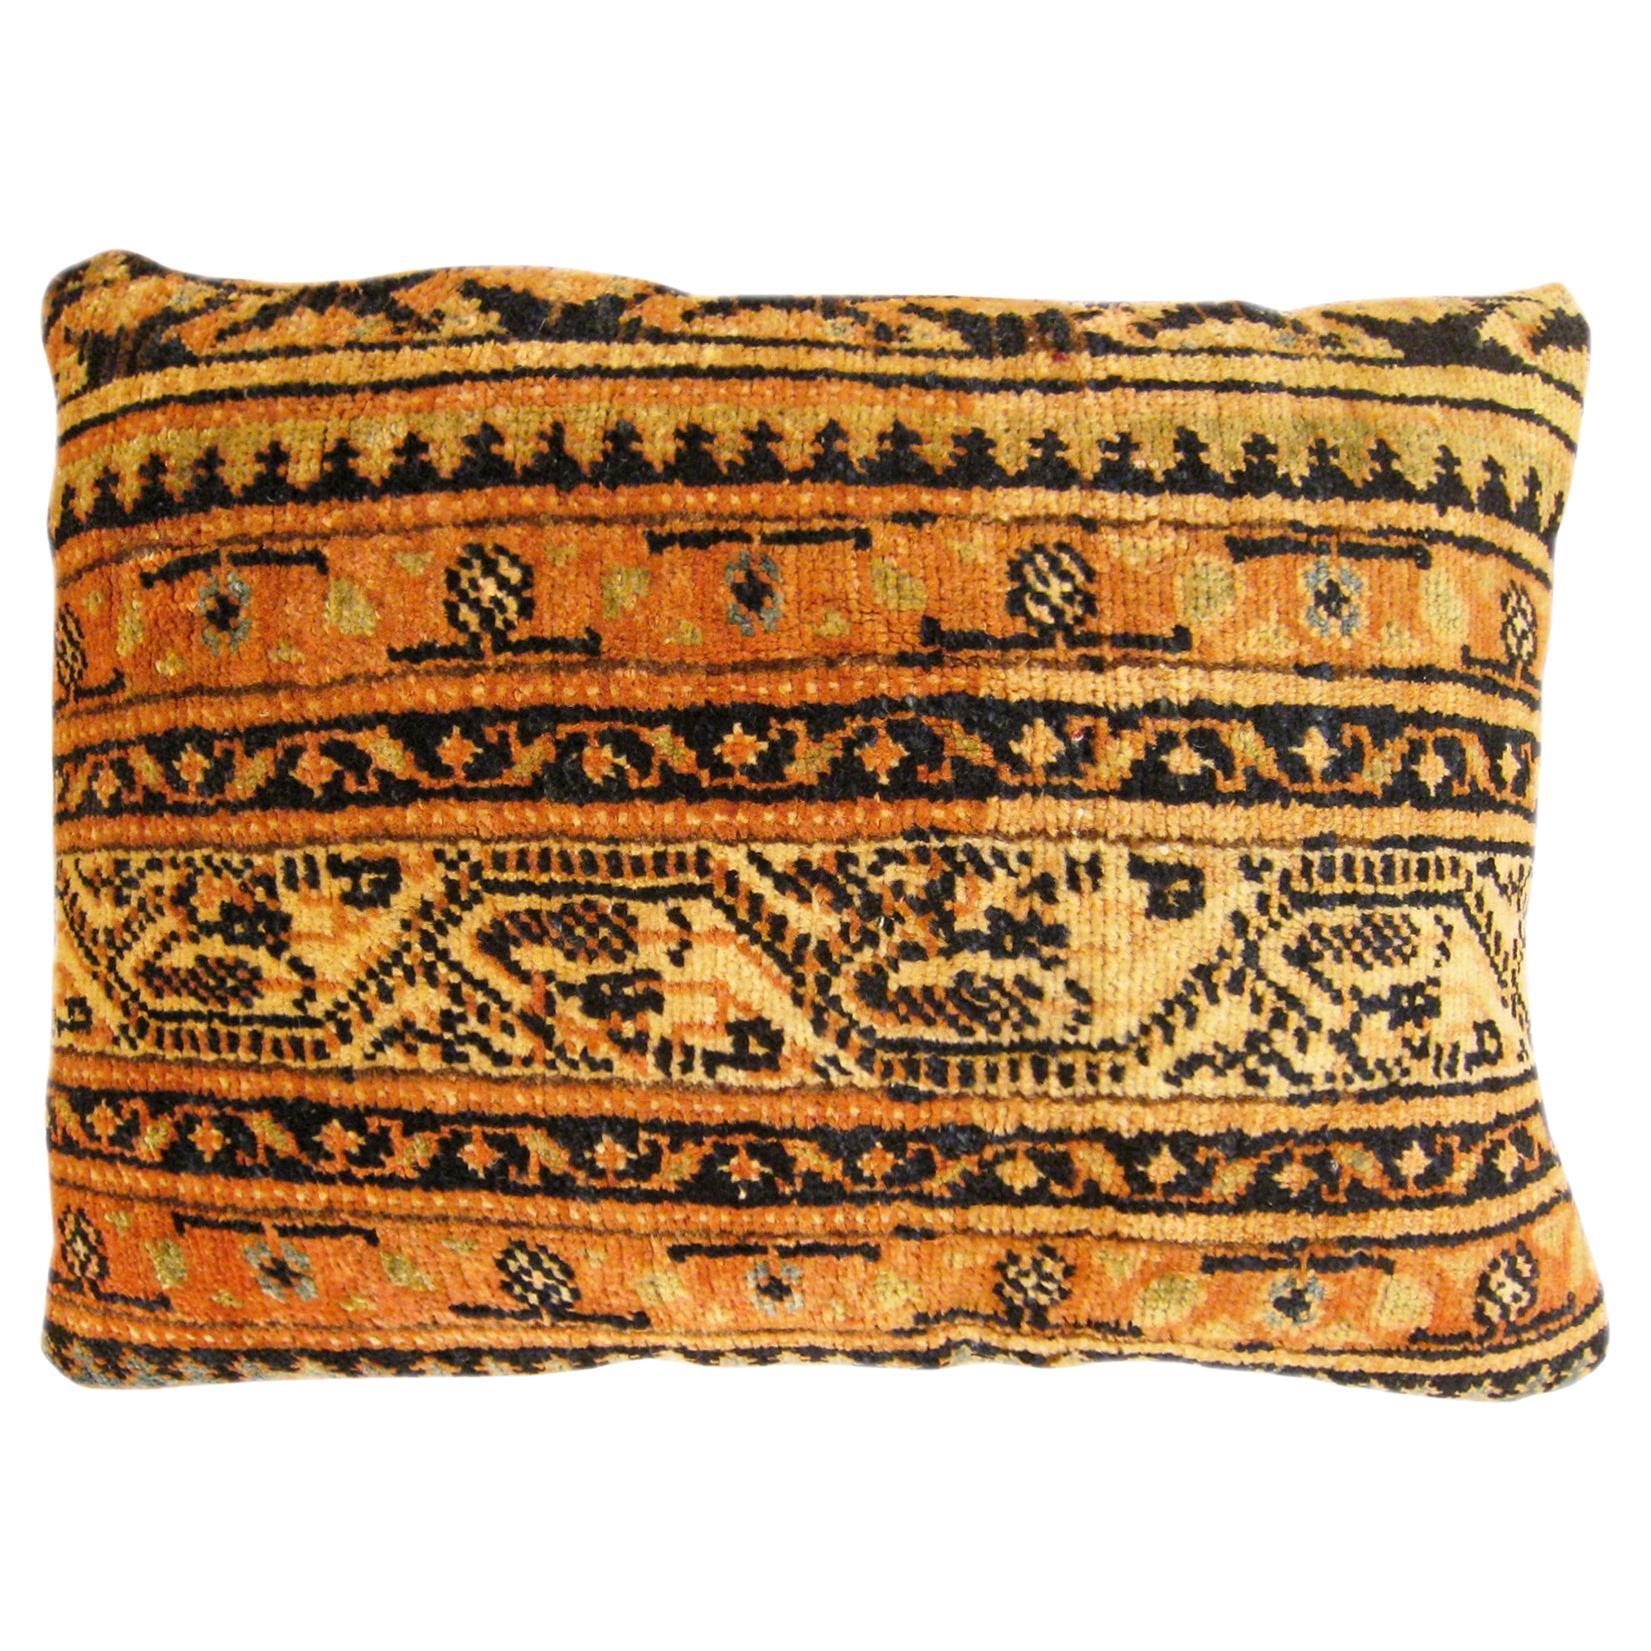 Decorative Antique Persian Saraband Carpet Pillow with a Paisley Design Allover For Sale